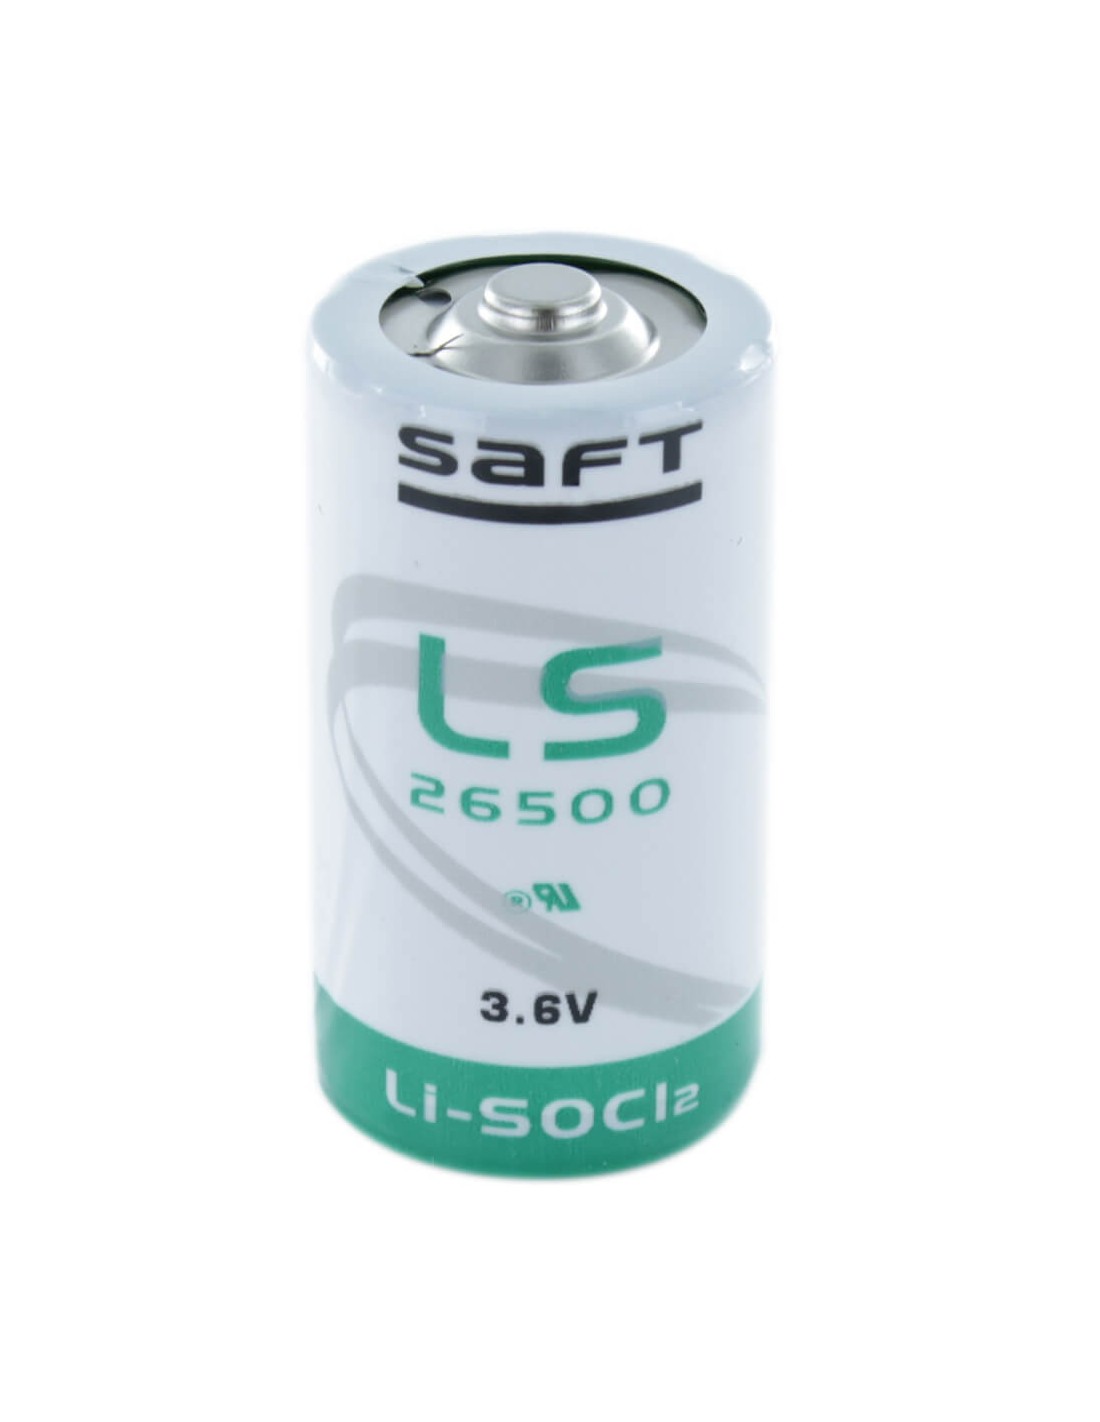 100 Pieces of Saft LS-26500 3.6V C Size Lithium Battery (ER26500) 3.6V - Non Rechargeable